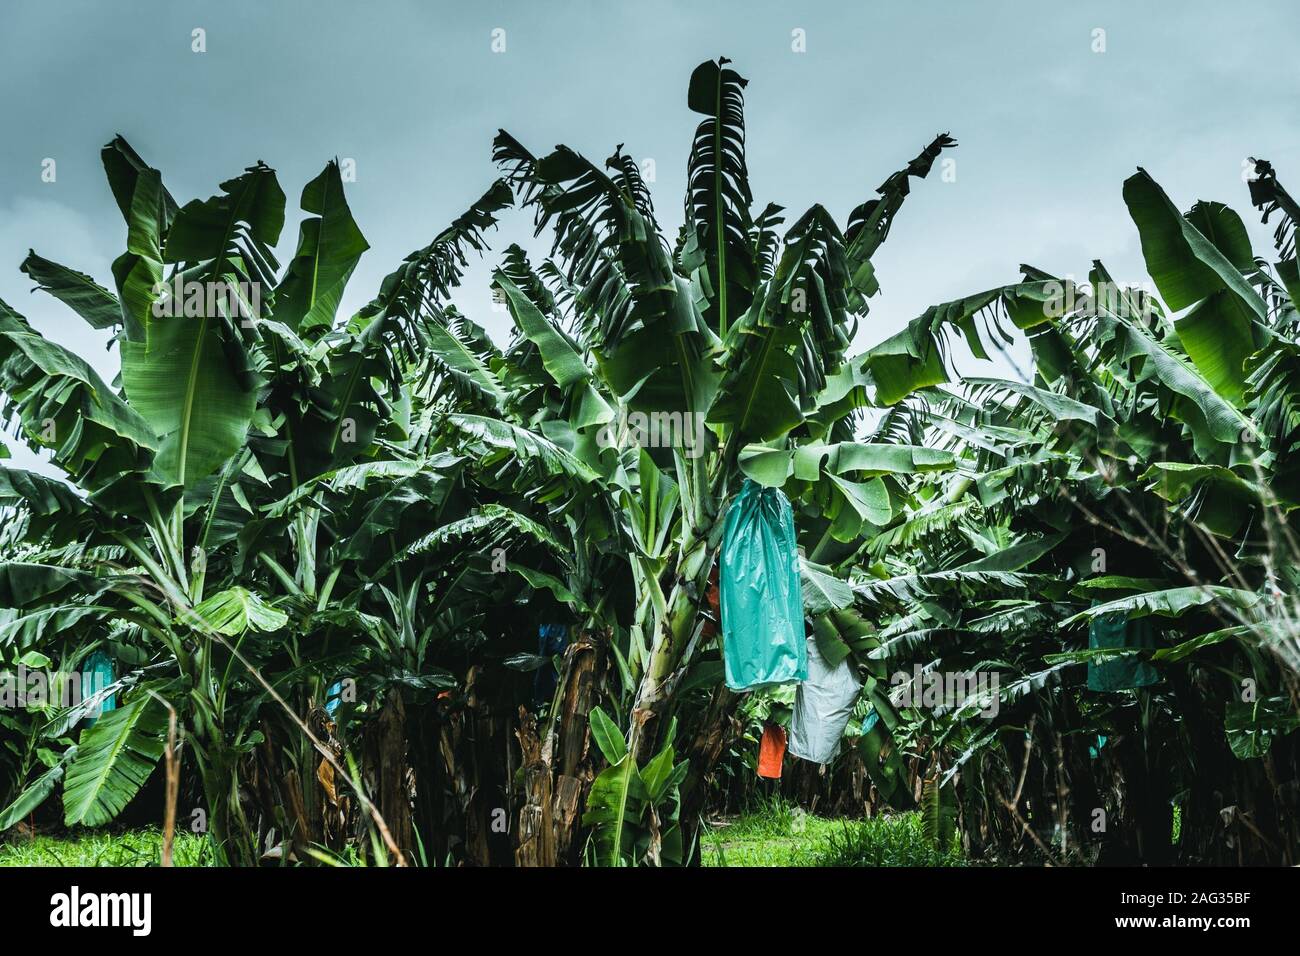 Field of green Ensete plants growing close to each other under the clear sky Stock Photo